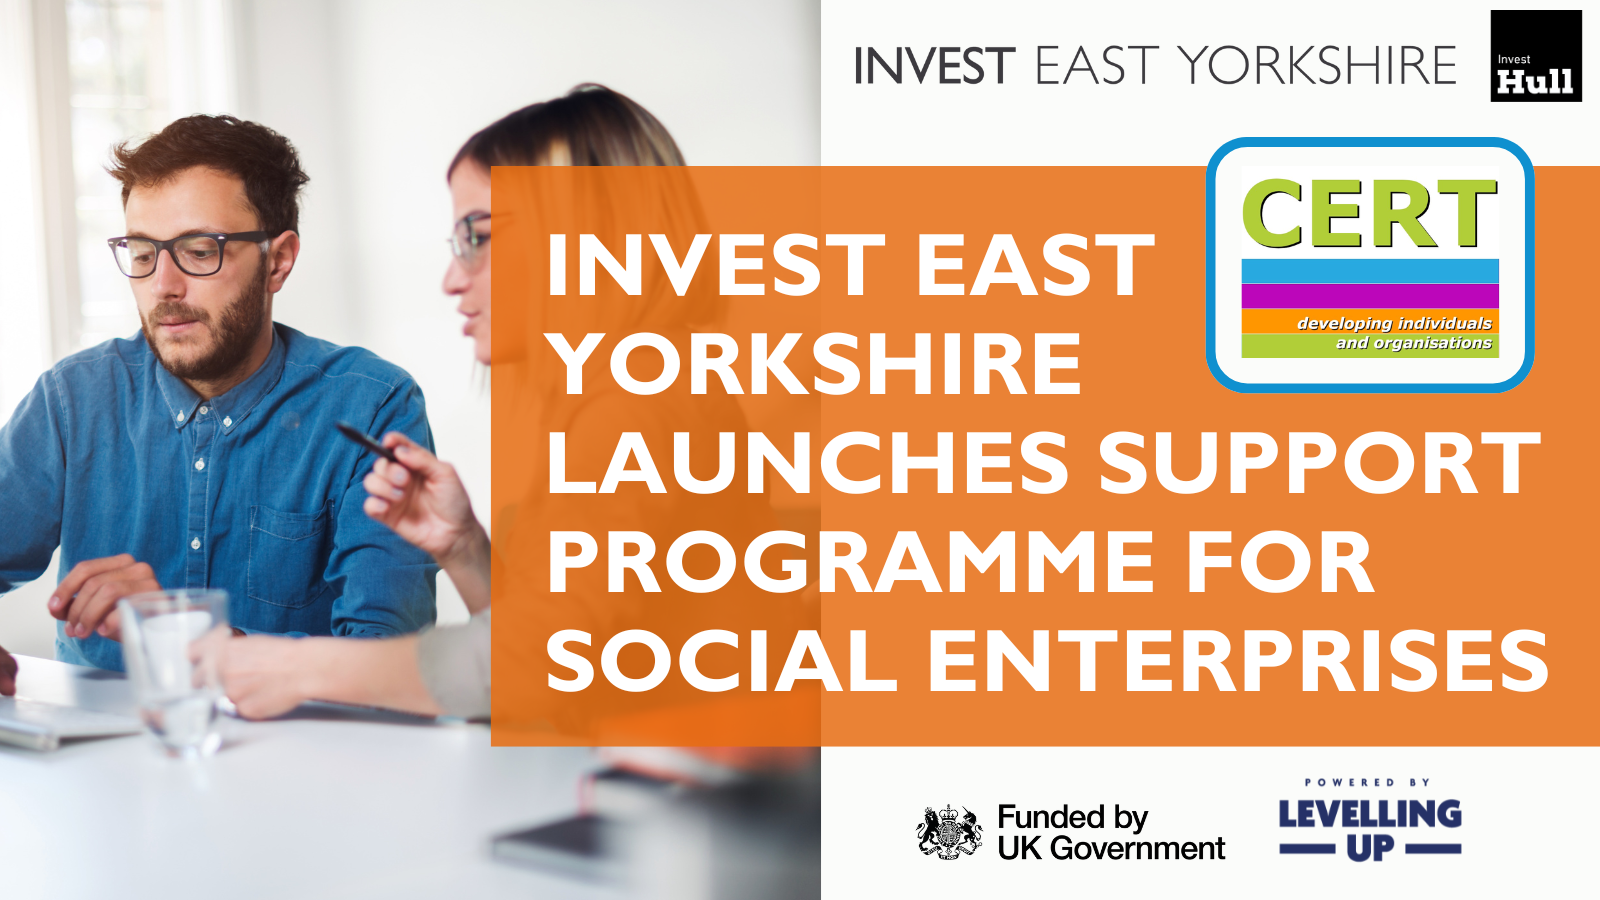 Graphic to promote the social enterprise support programme